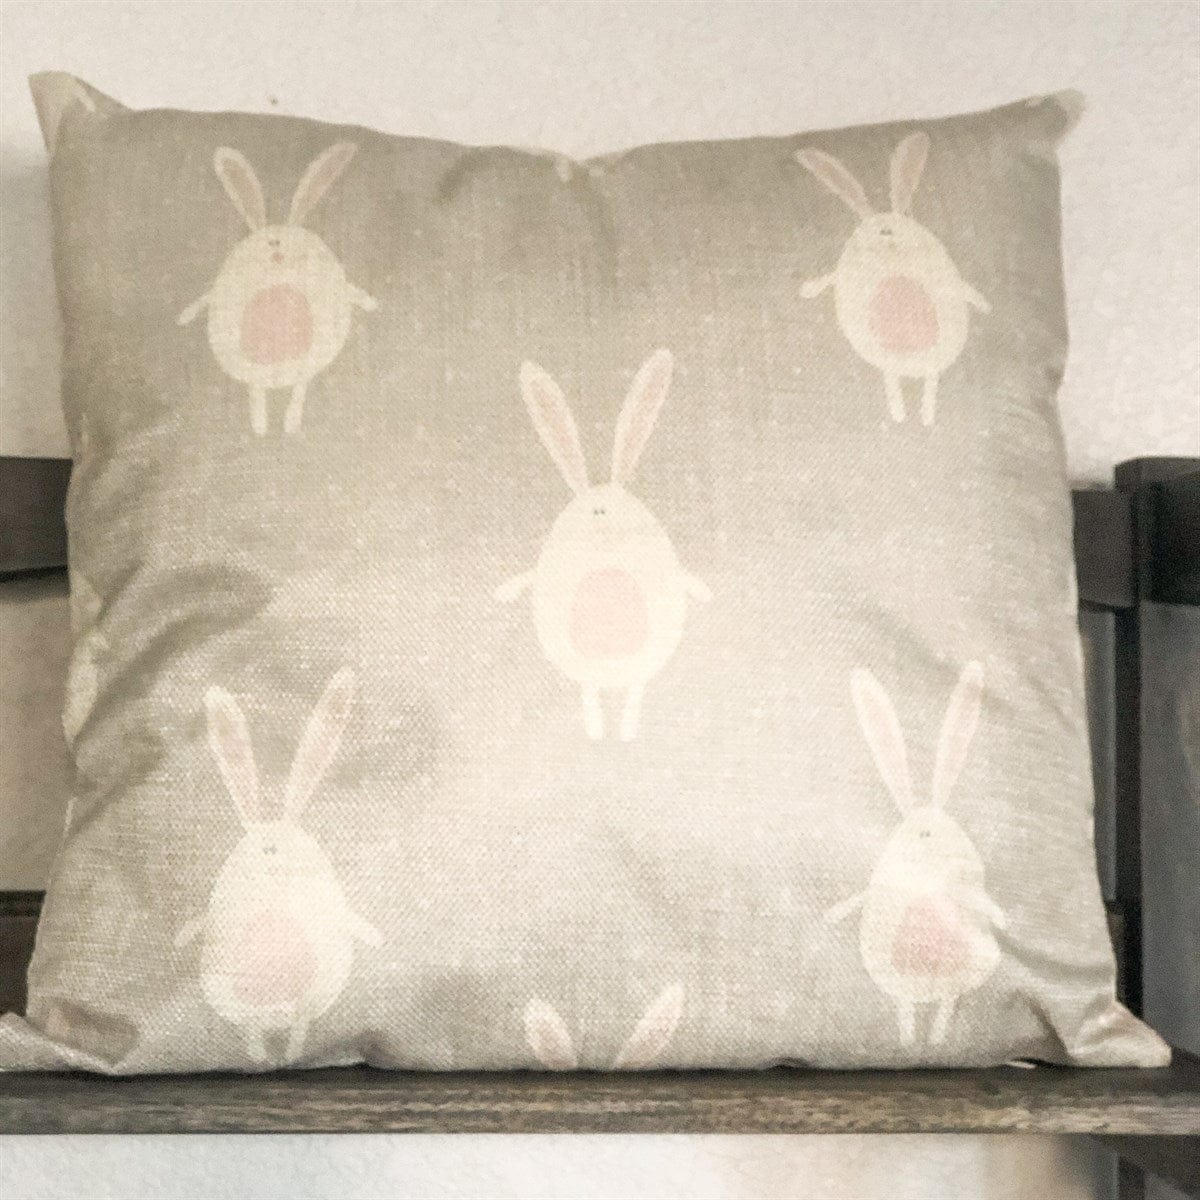 Spring Pillow Covers | 8 Options - PILLOW COVERS